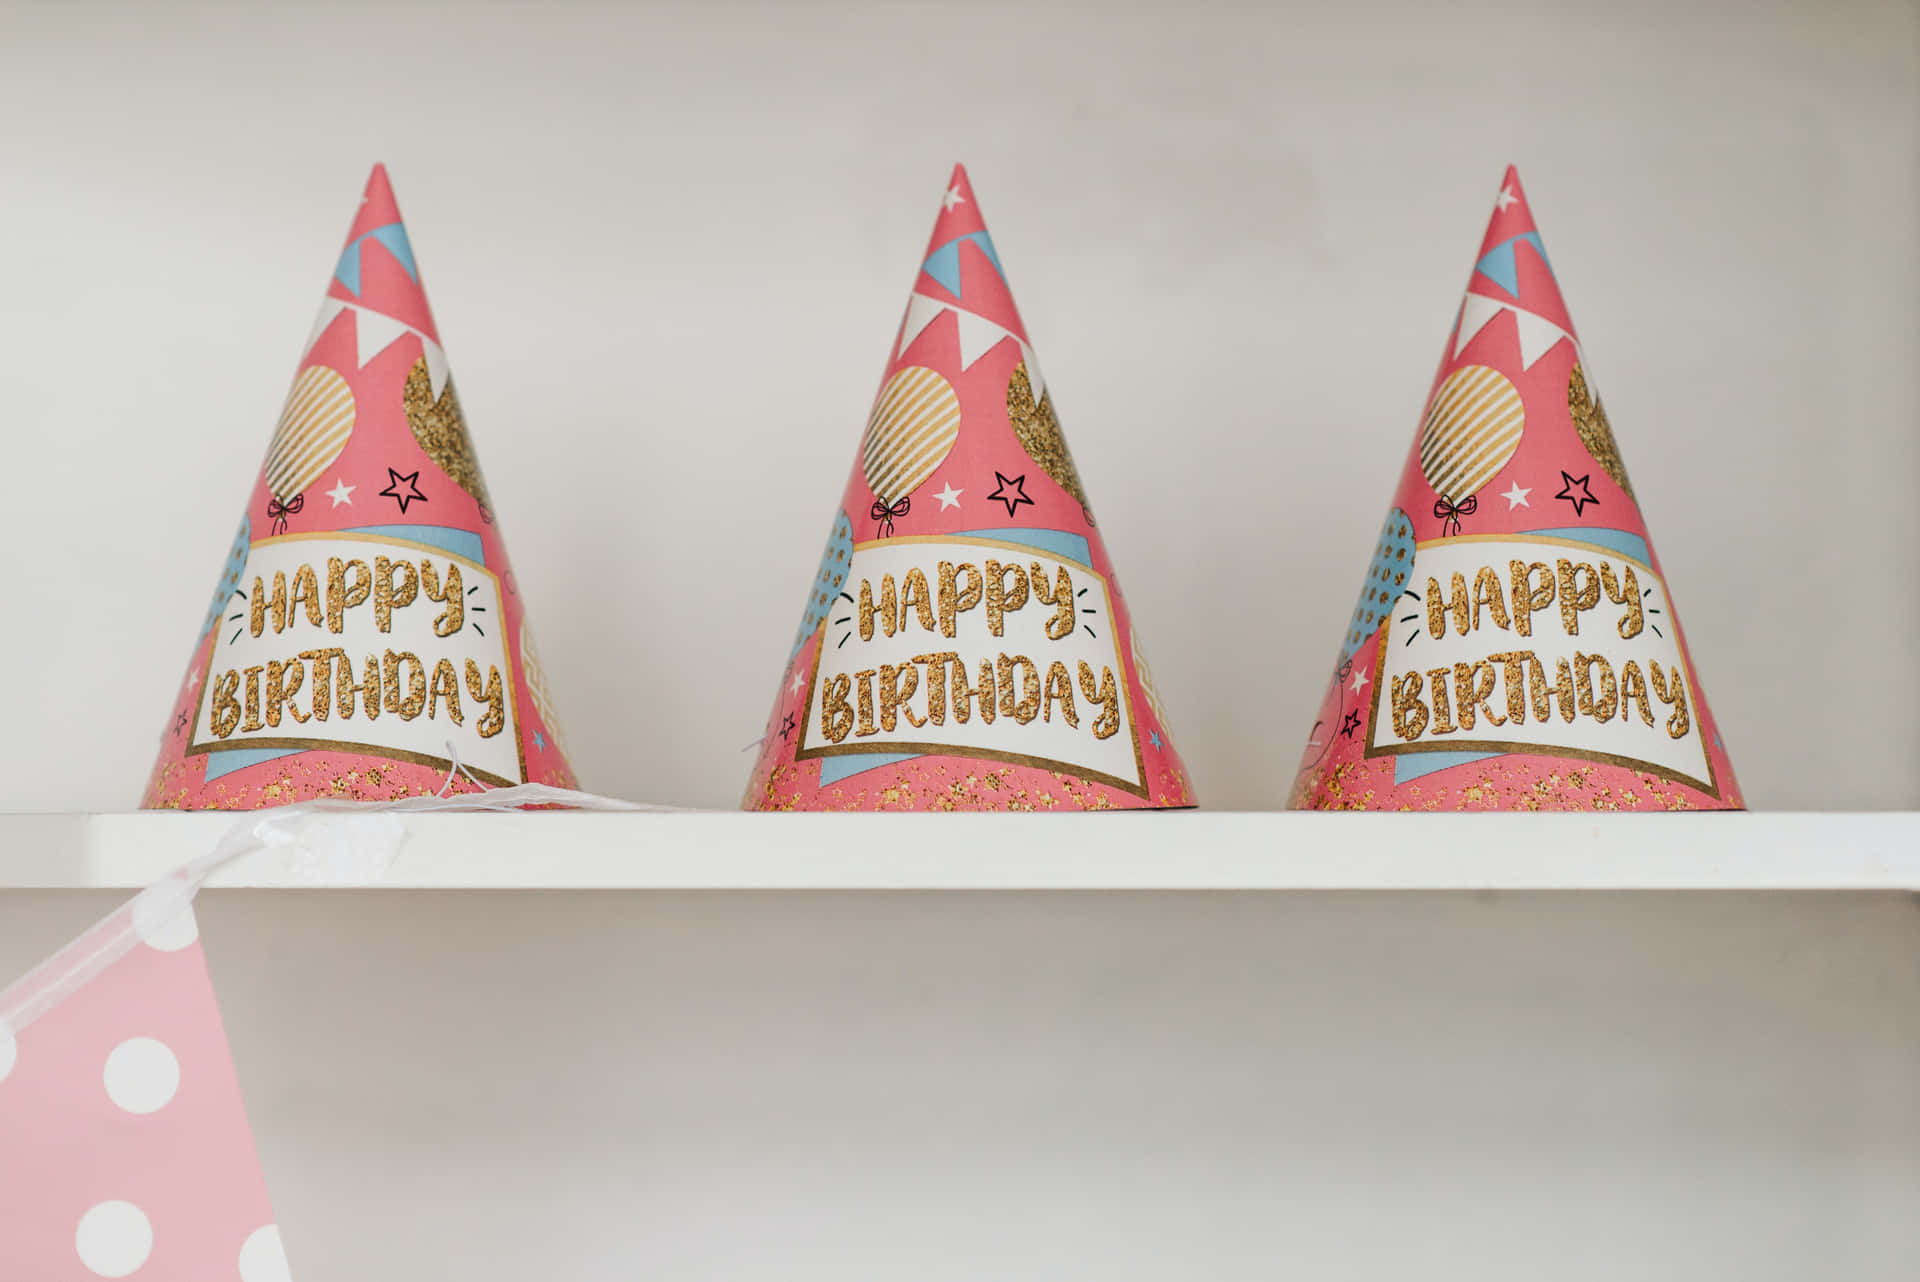 Three Pink And White Party Hats On A Shelf